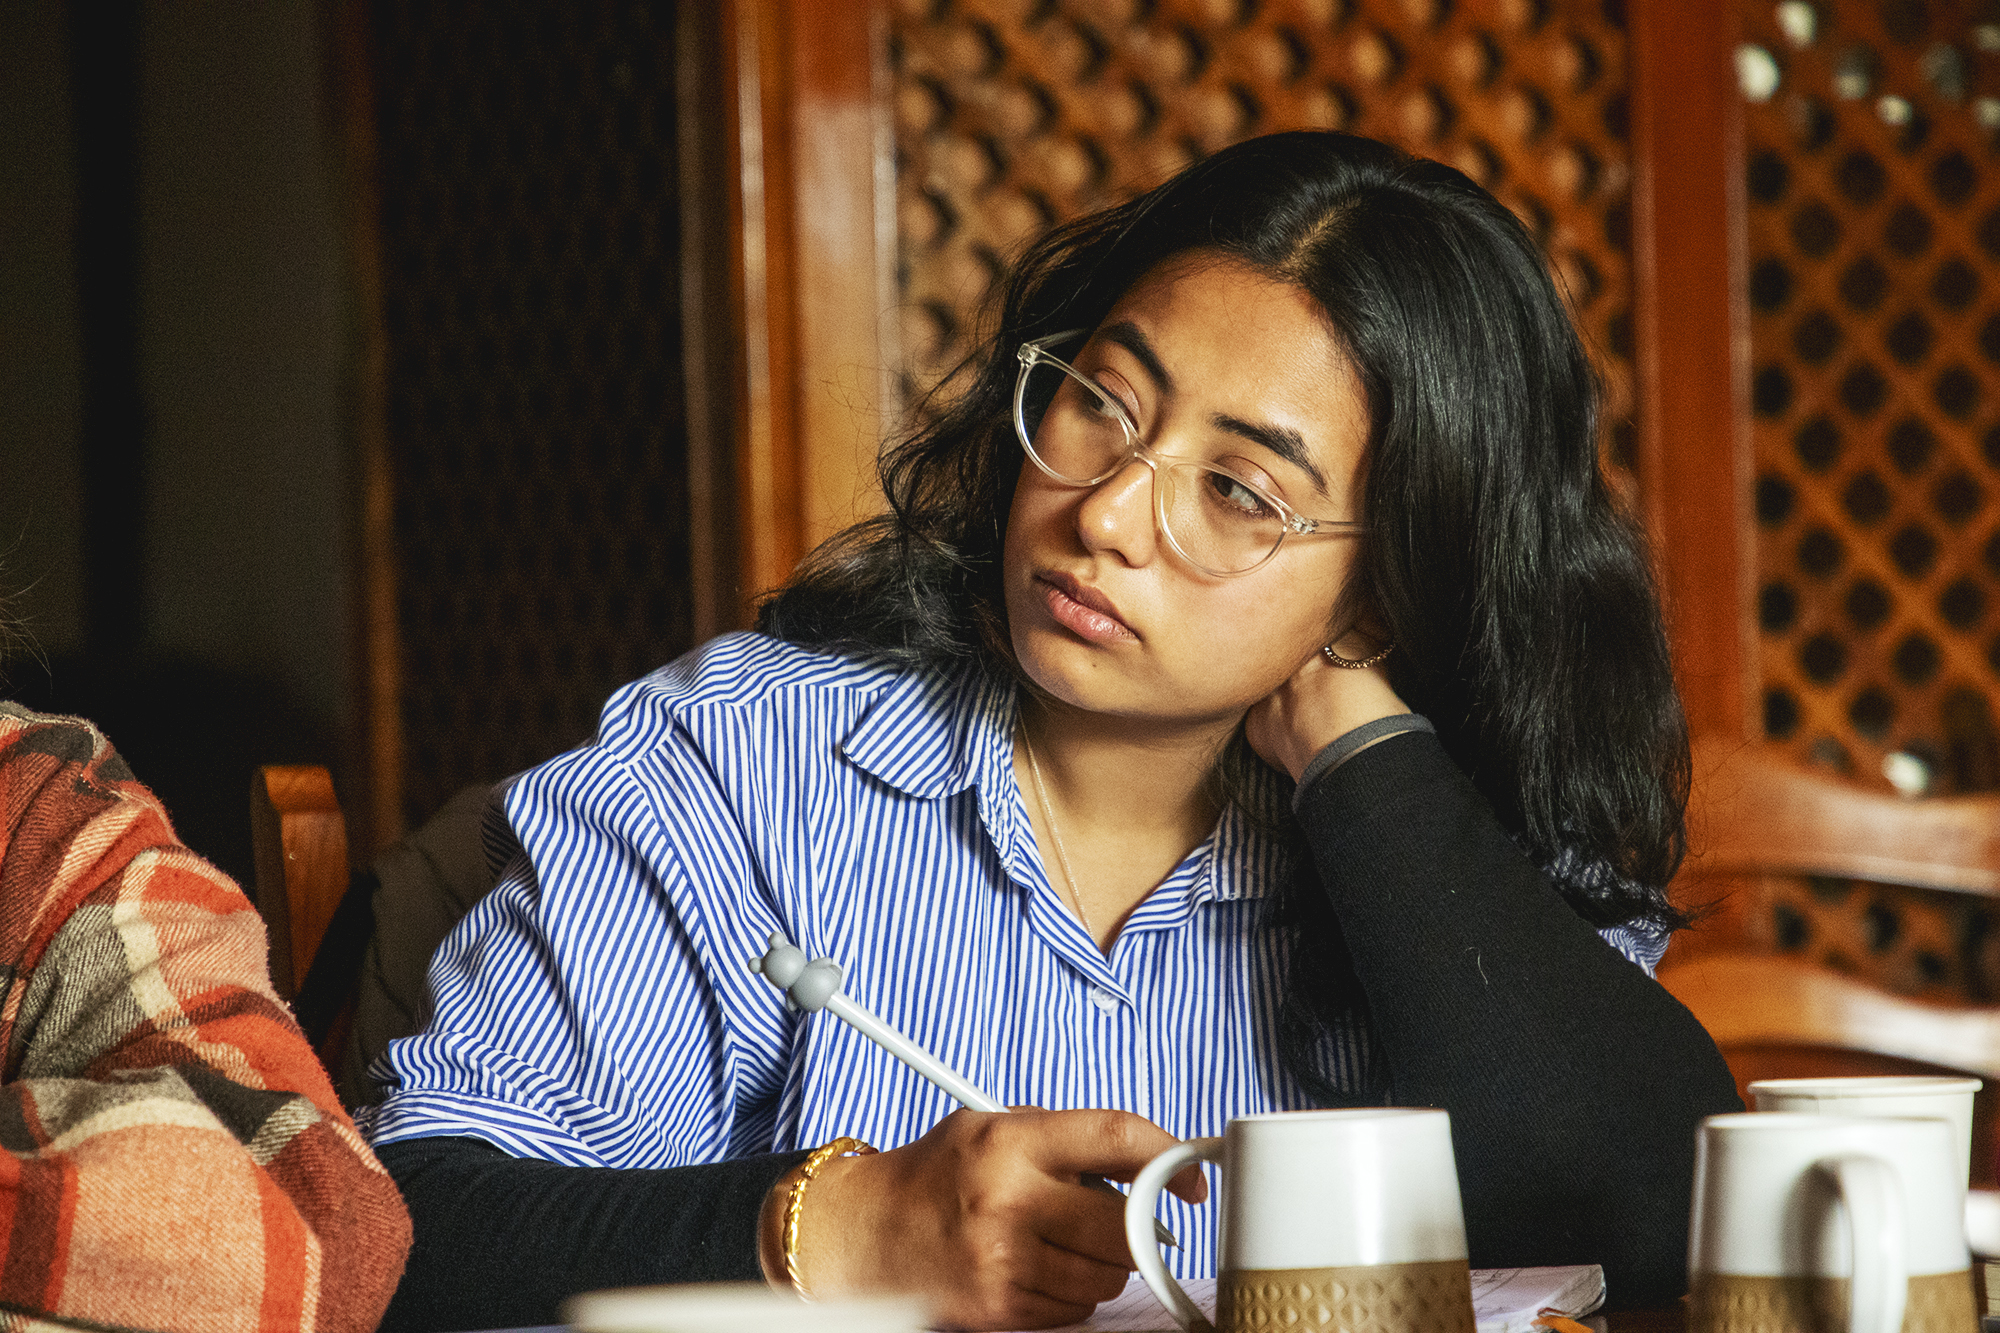 A young female in glasses listening concentrated and leaning on her hand.